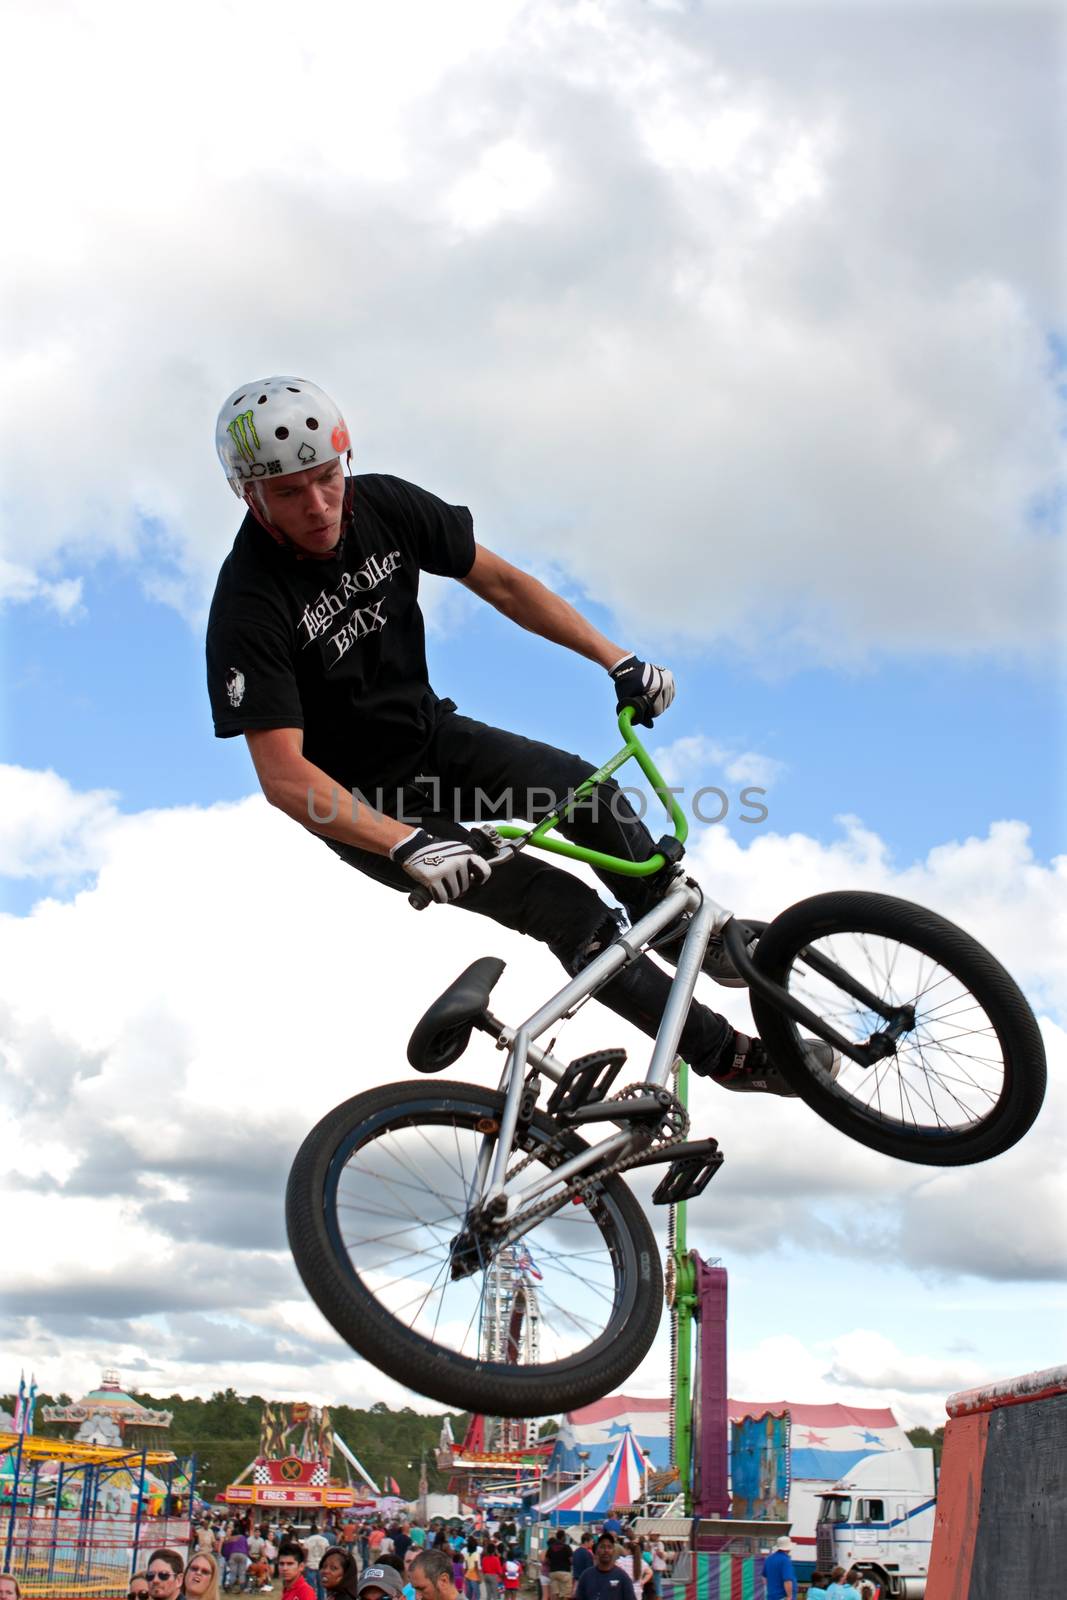 Hampton, GA, USA - September 27, 2014:  A young man with the High Roller BMX club spins his bike in midair while performing a BMX stunt at the Georgia State Fair.